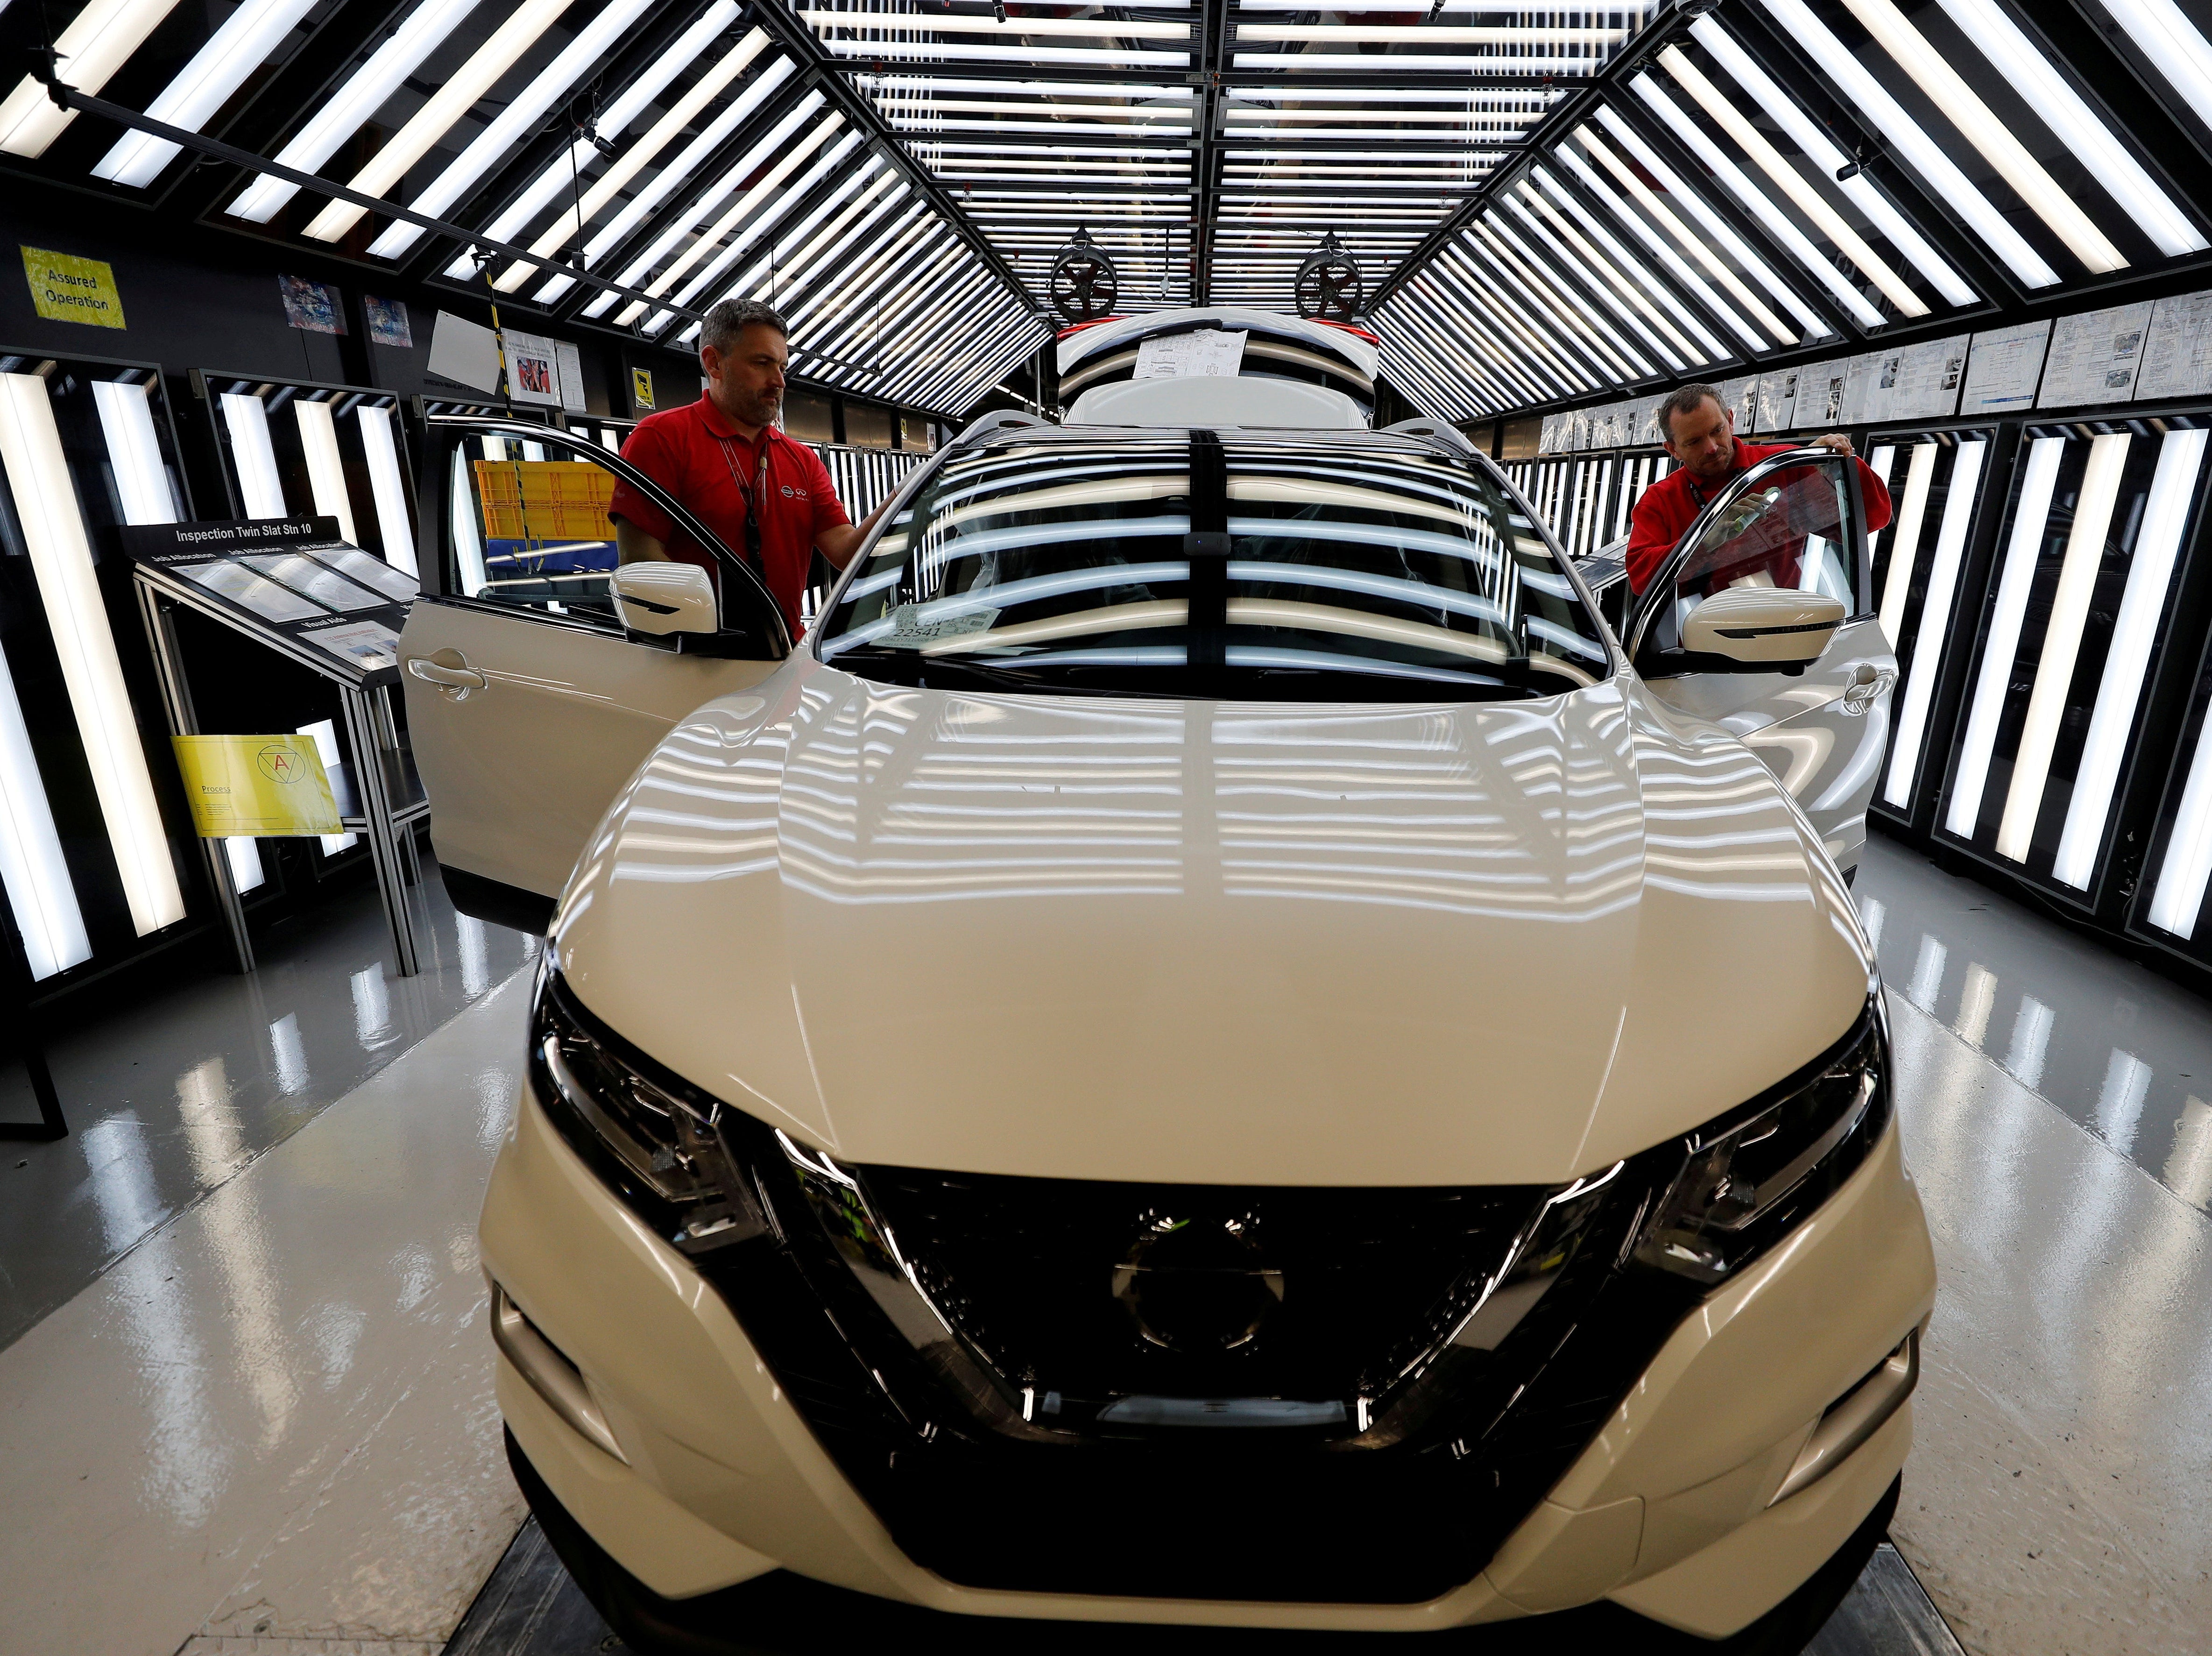 Employment boost welcomed as Nissan announces plans for a huge new plant in Sunderland